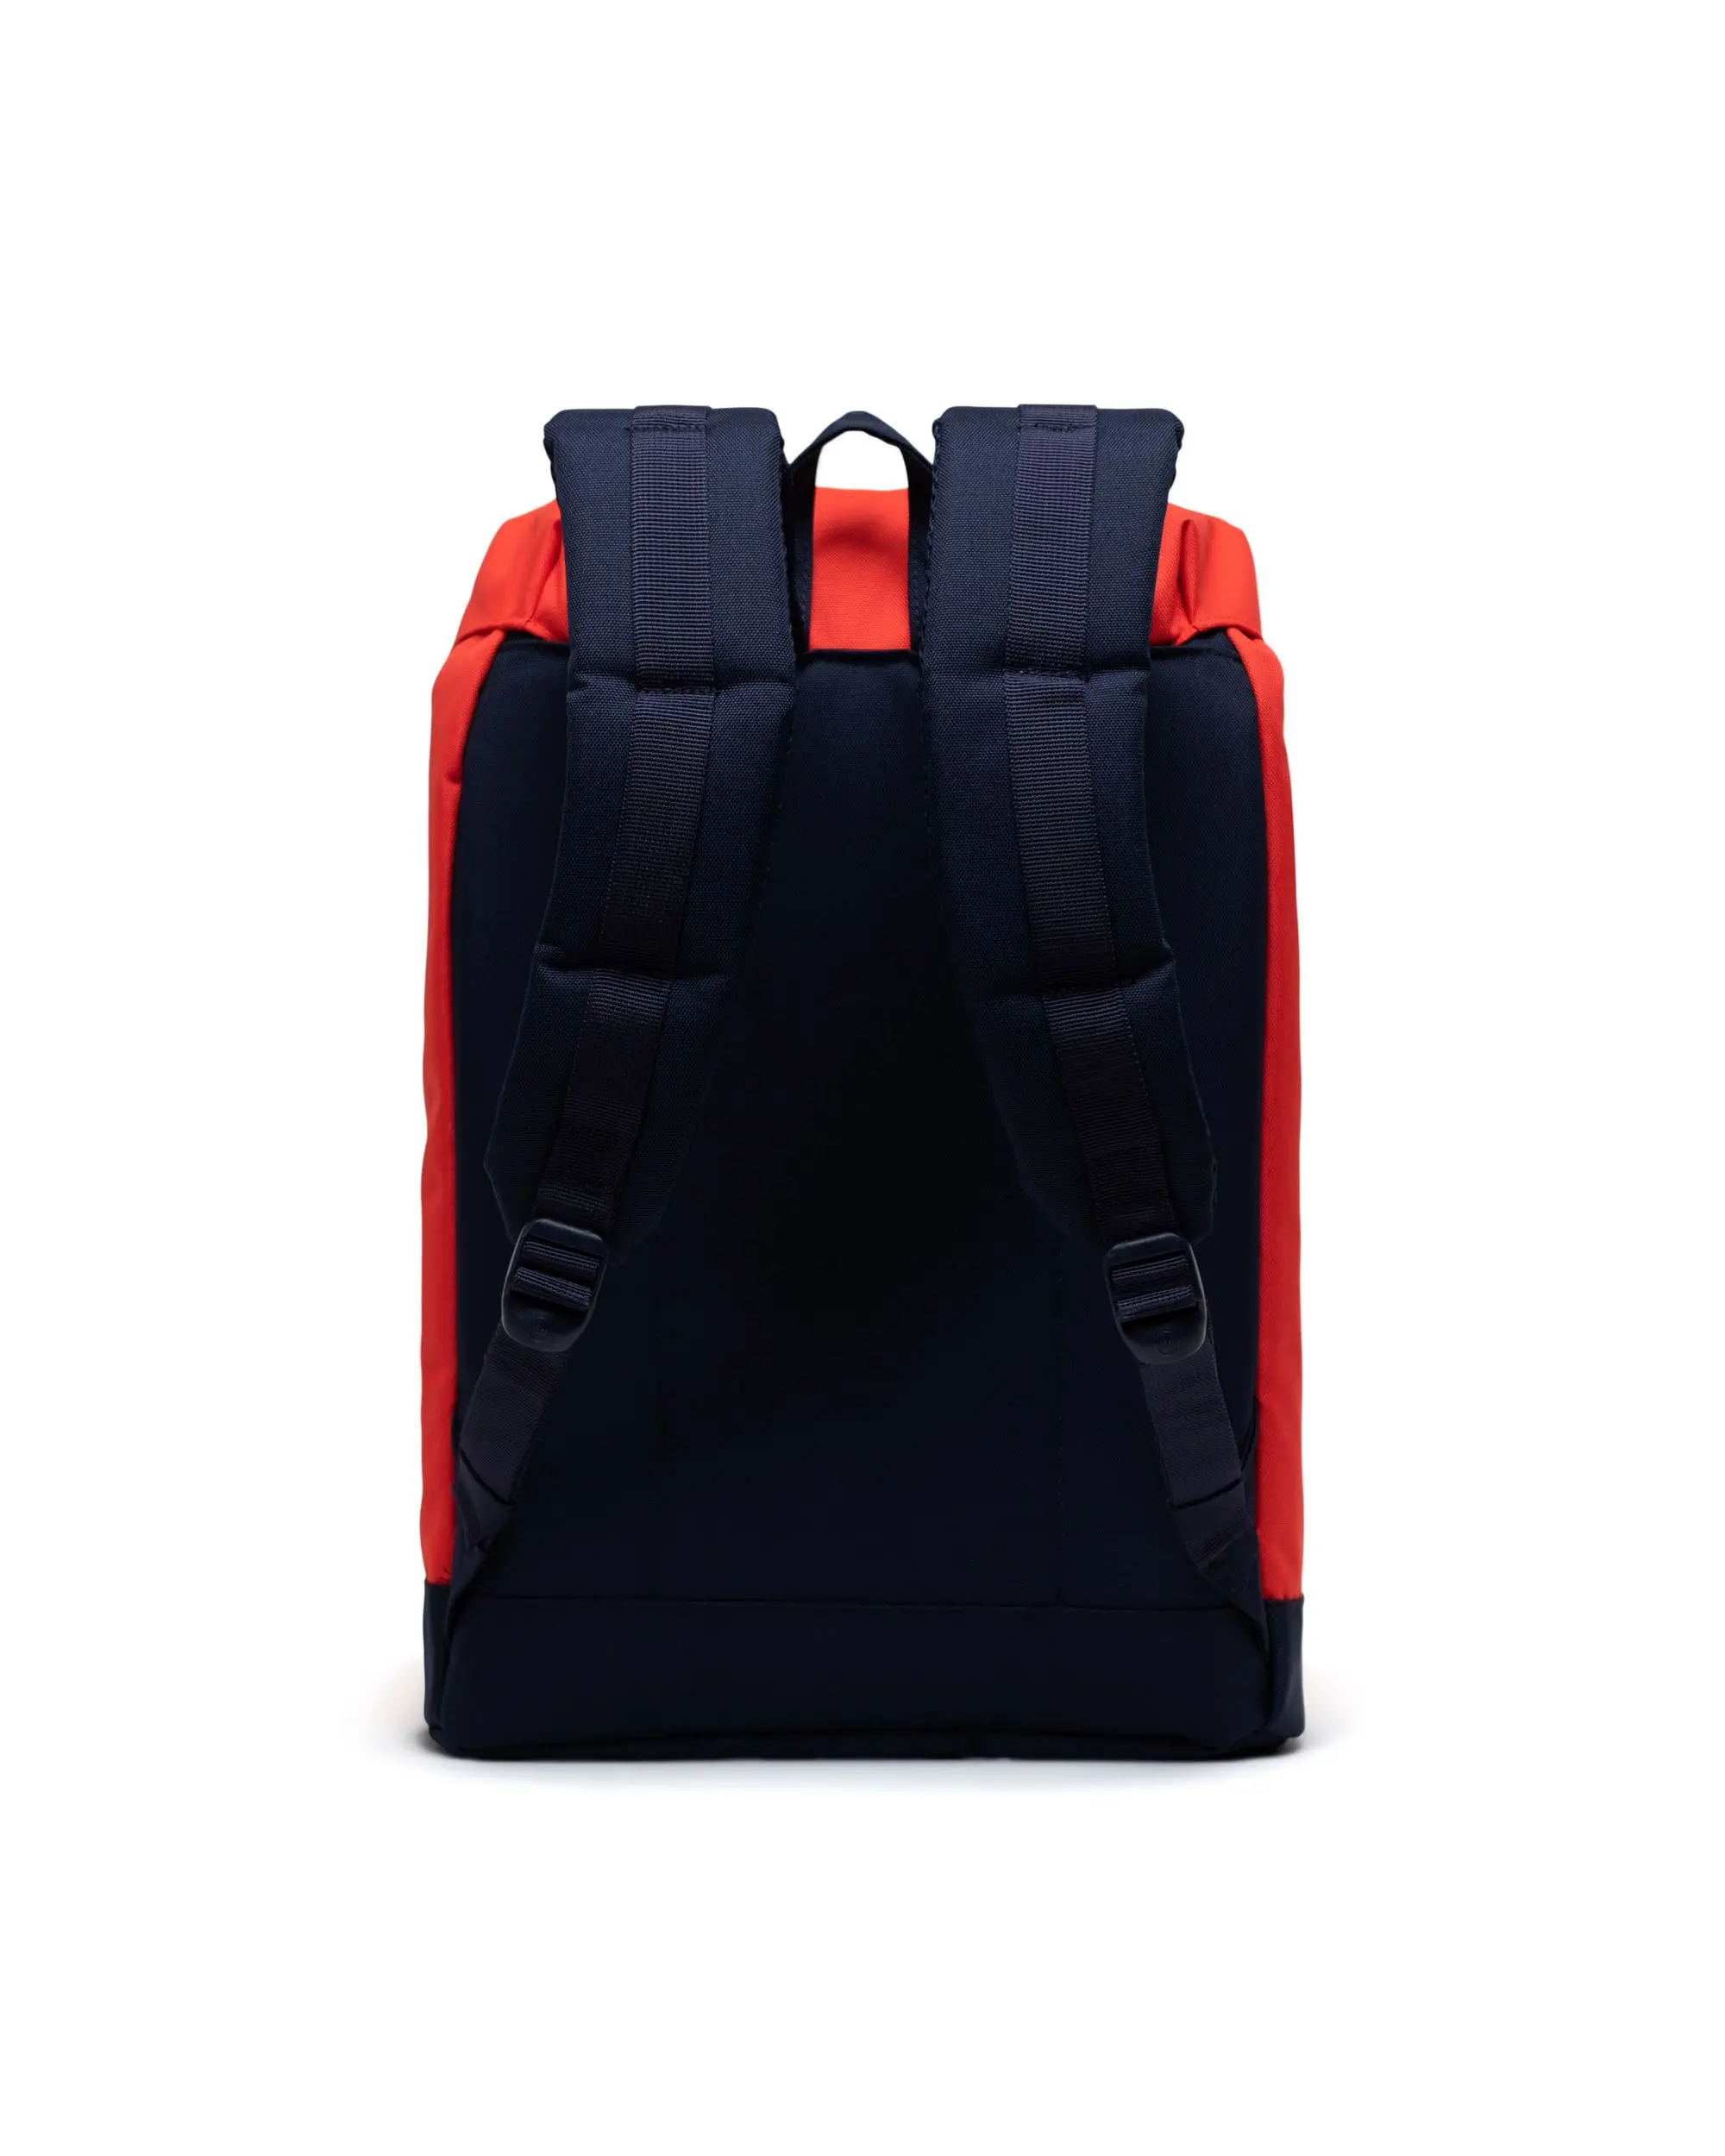 Herschel's Retreat brings classical simplicity to the laptop backpack